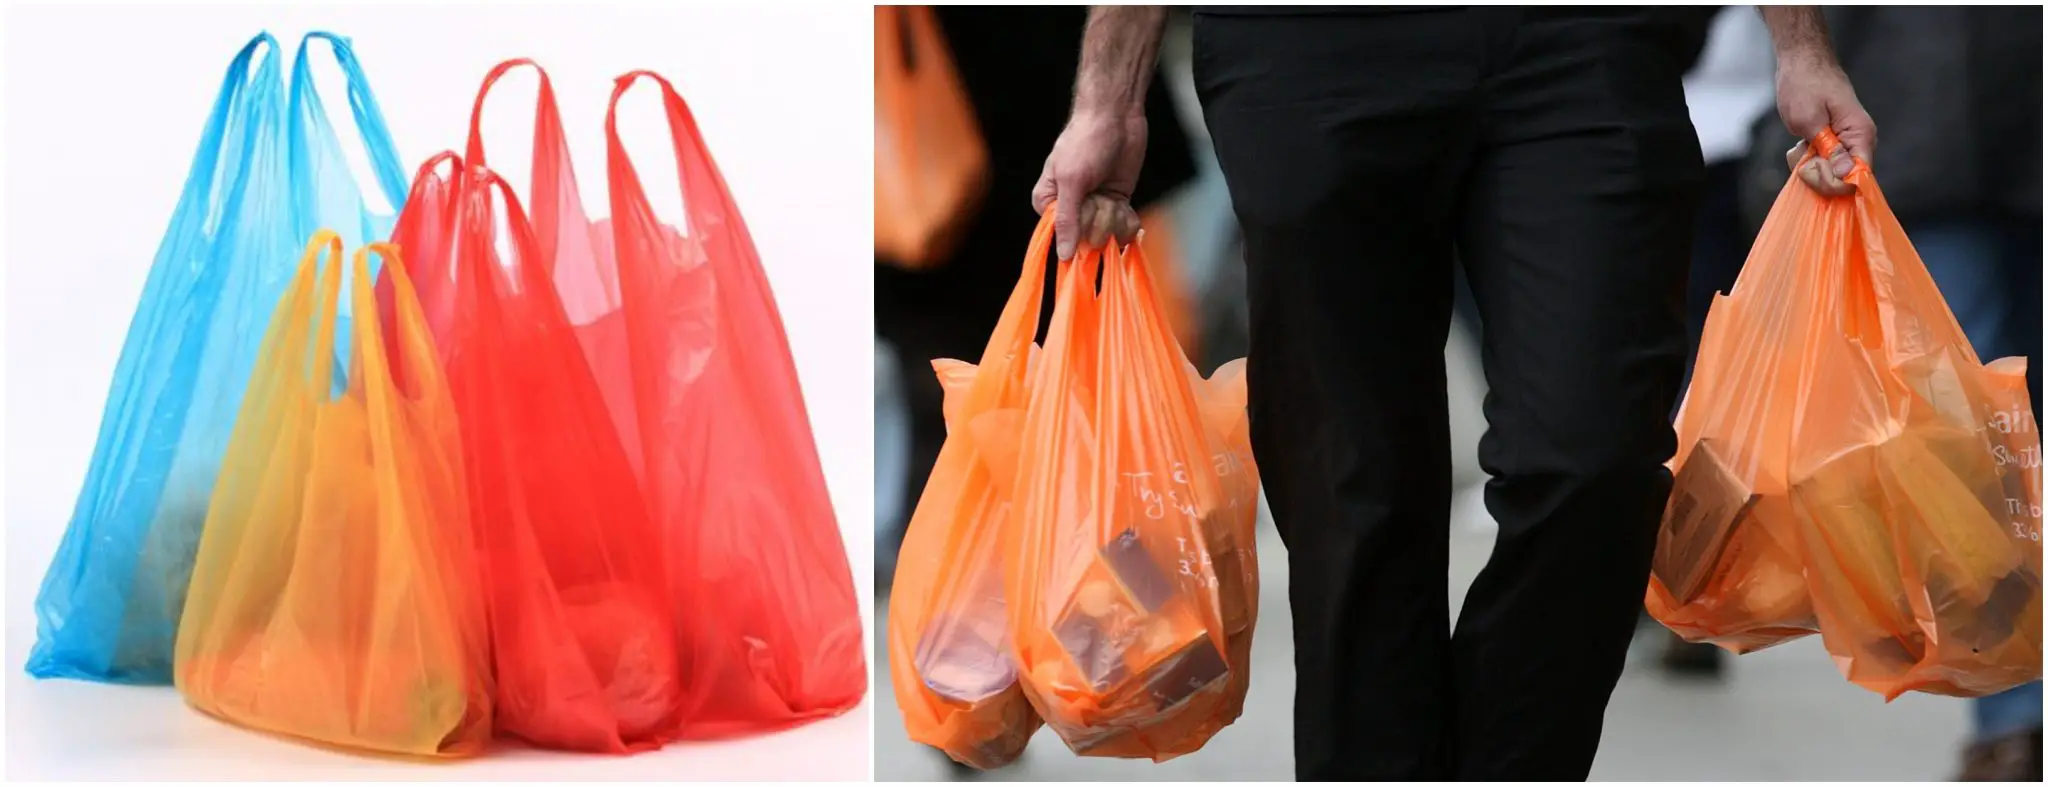 Penang Officially Starting No Plastic Bag Mondays From 1st July